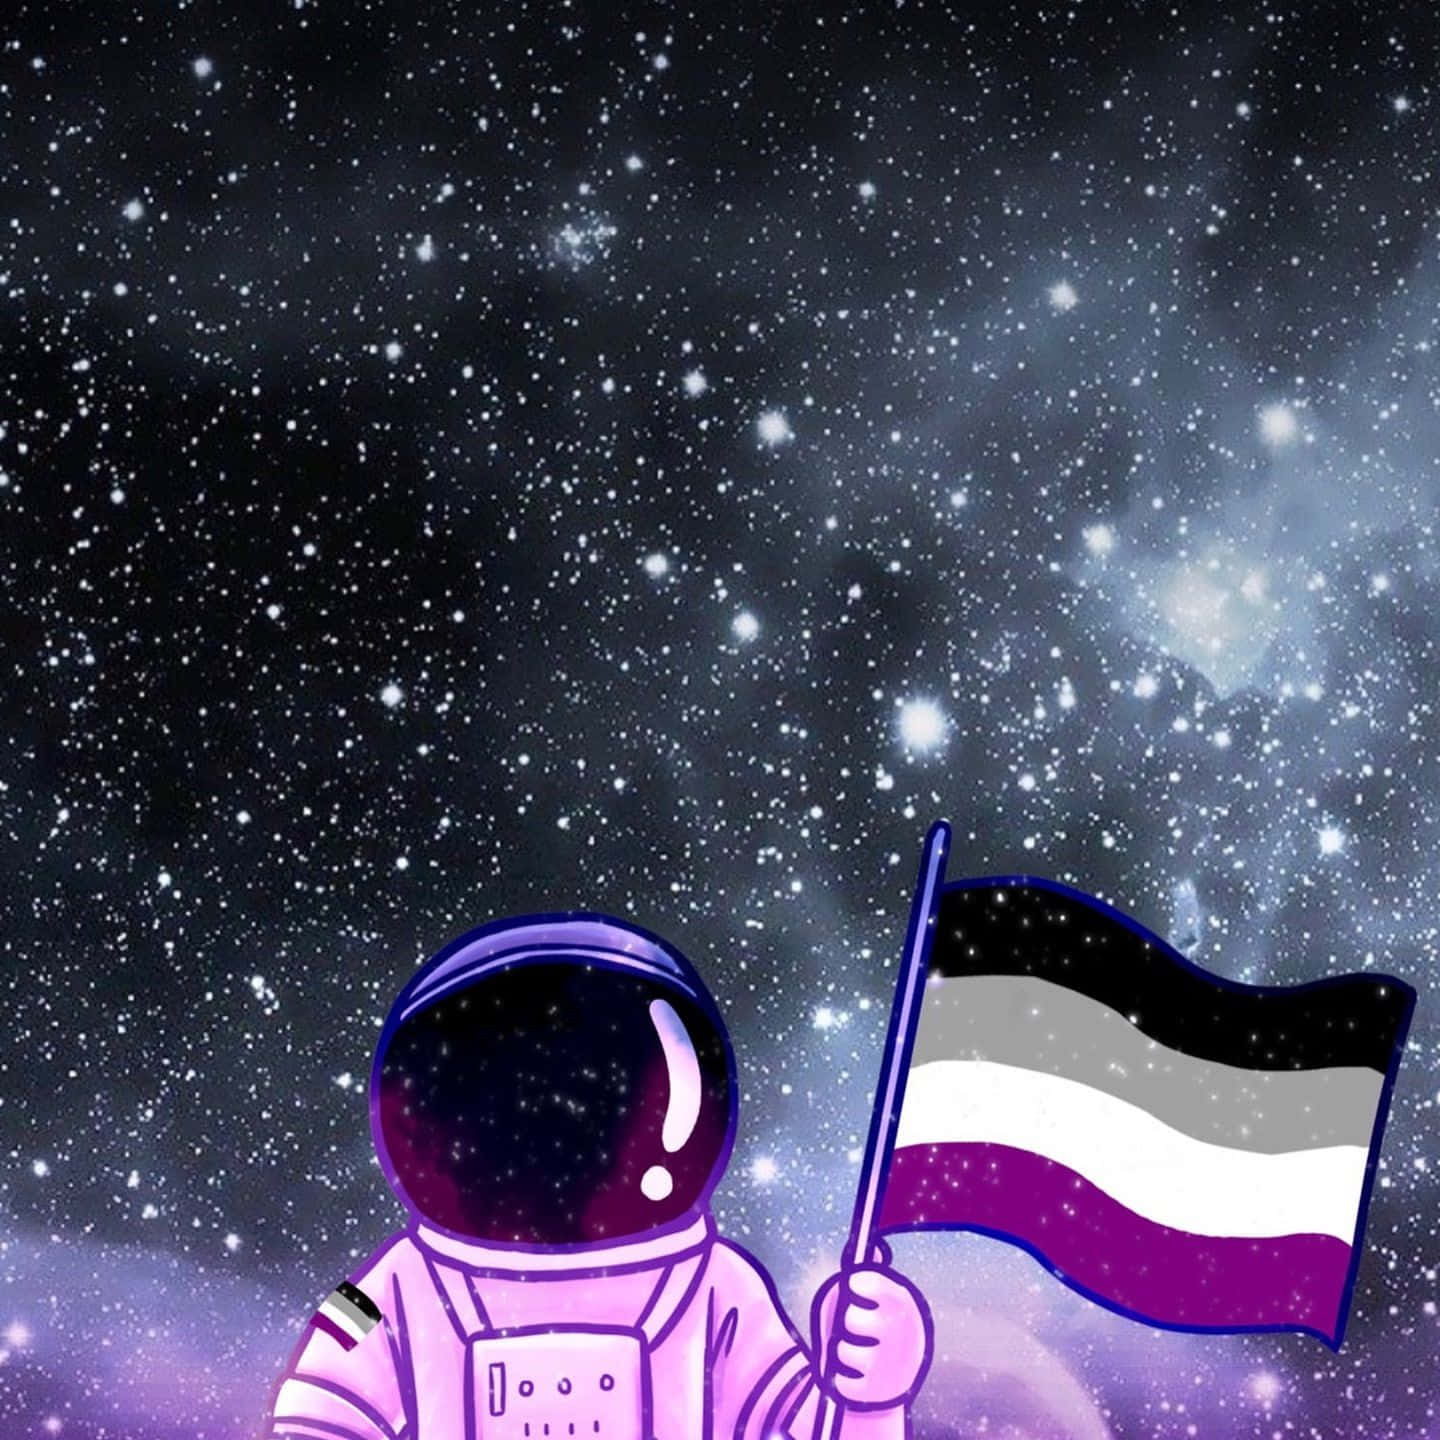 Download Astronaut Holding The Asexual Pride Flag Wallpaper